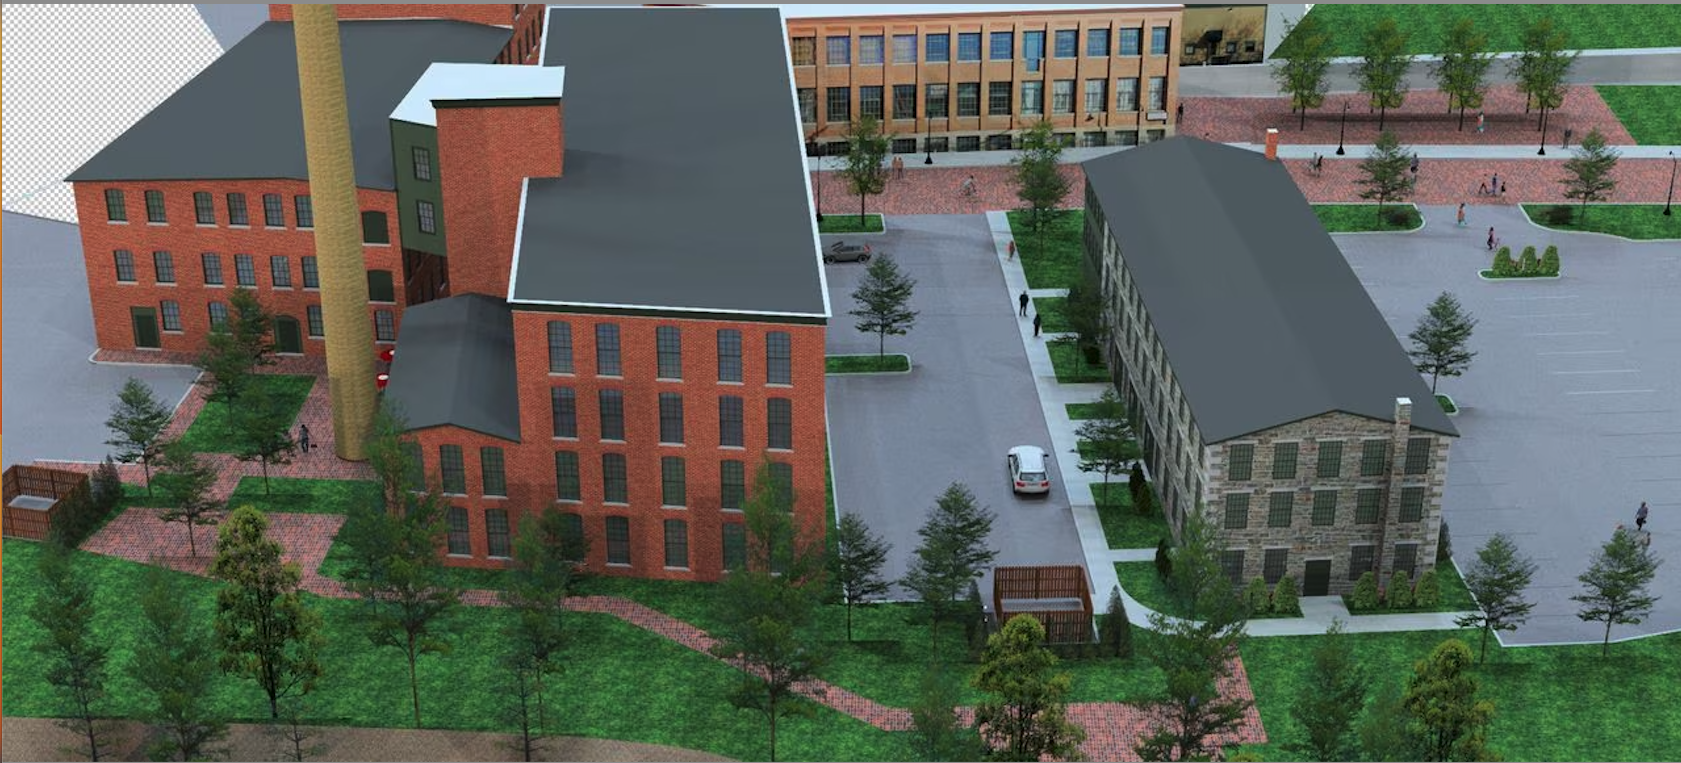 Rendering of new affordable development